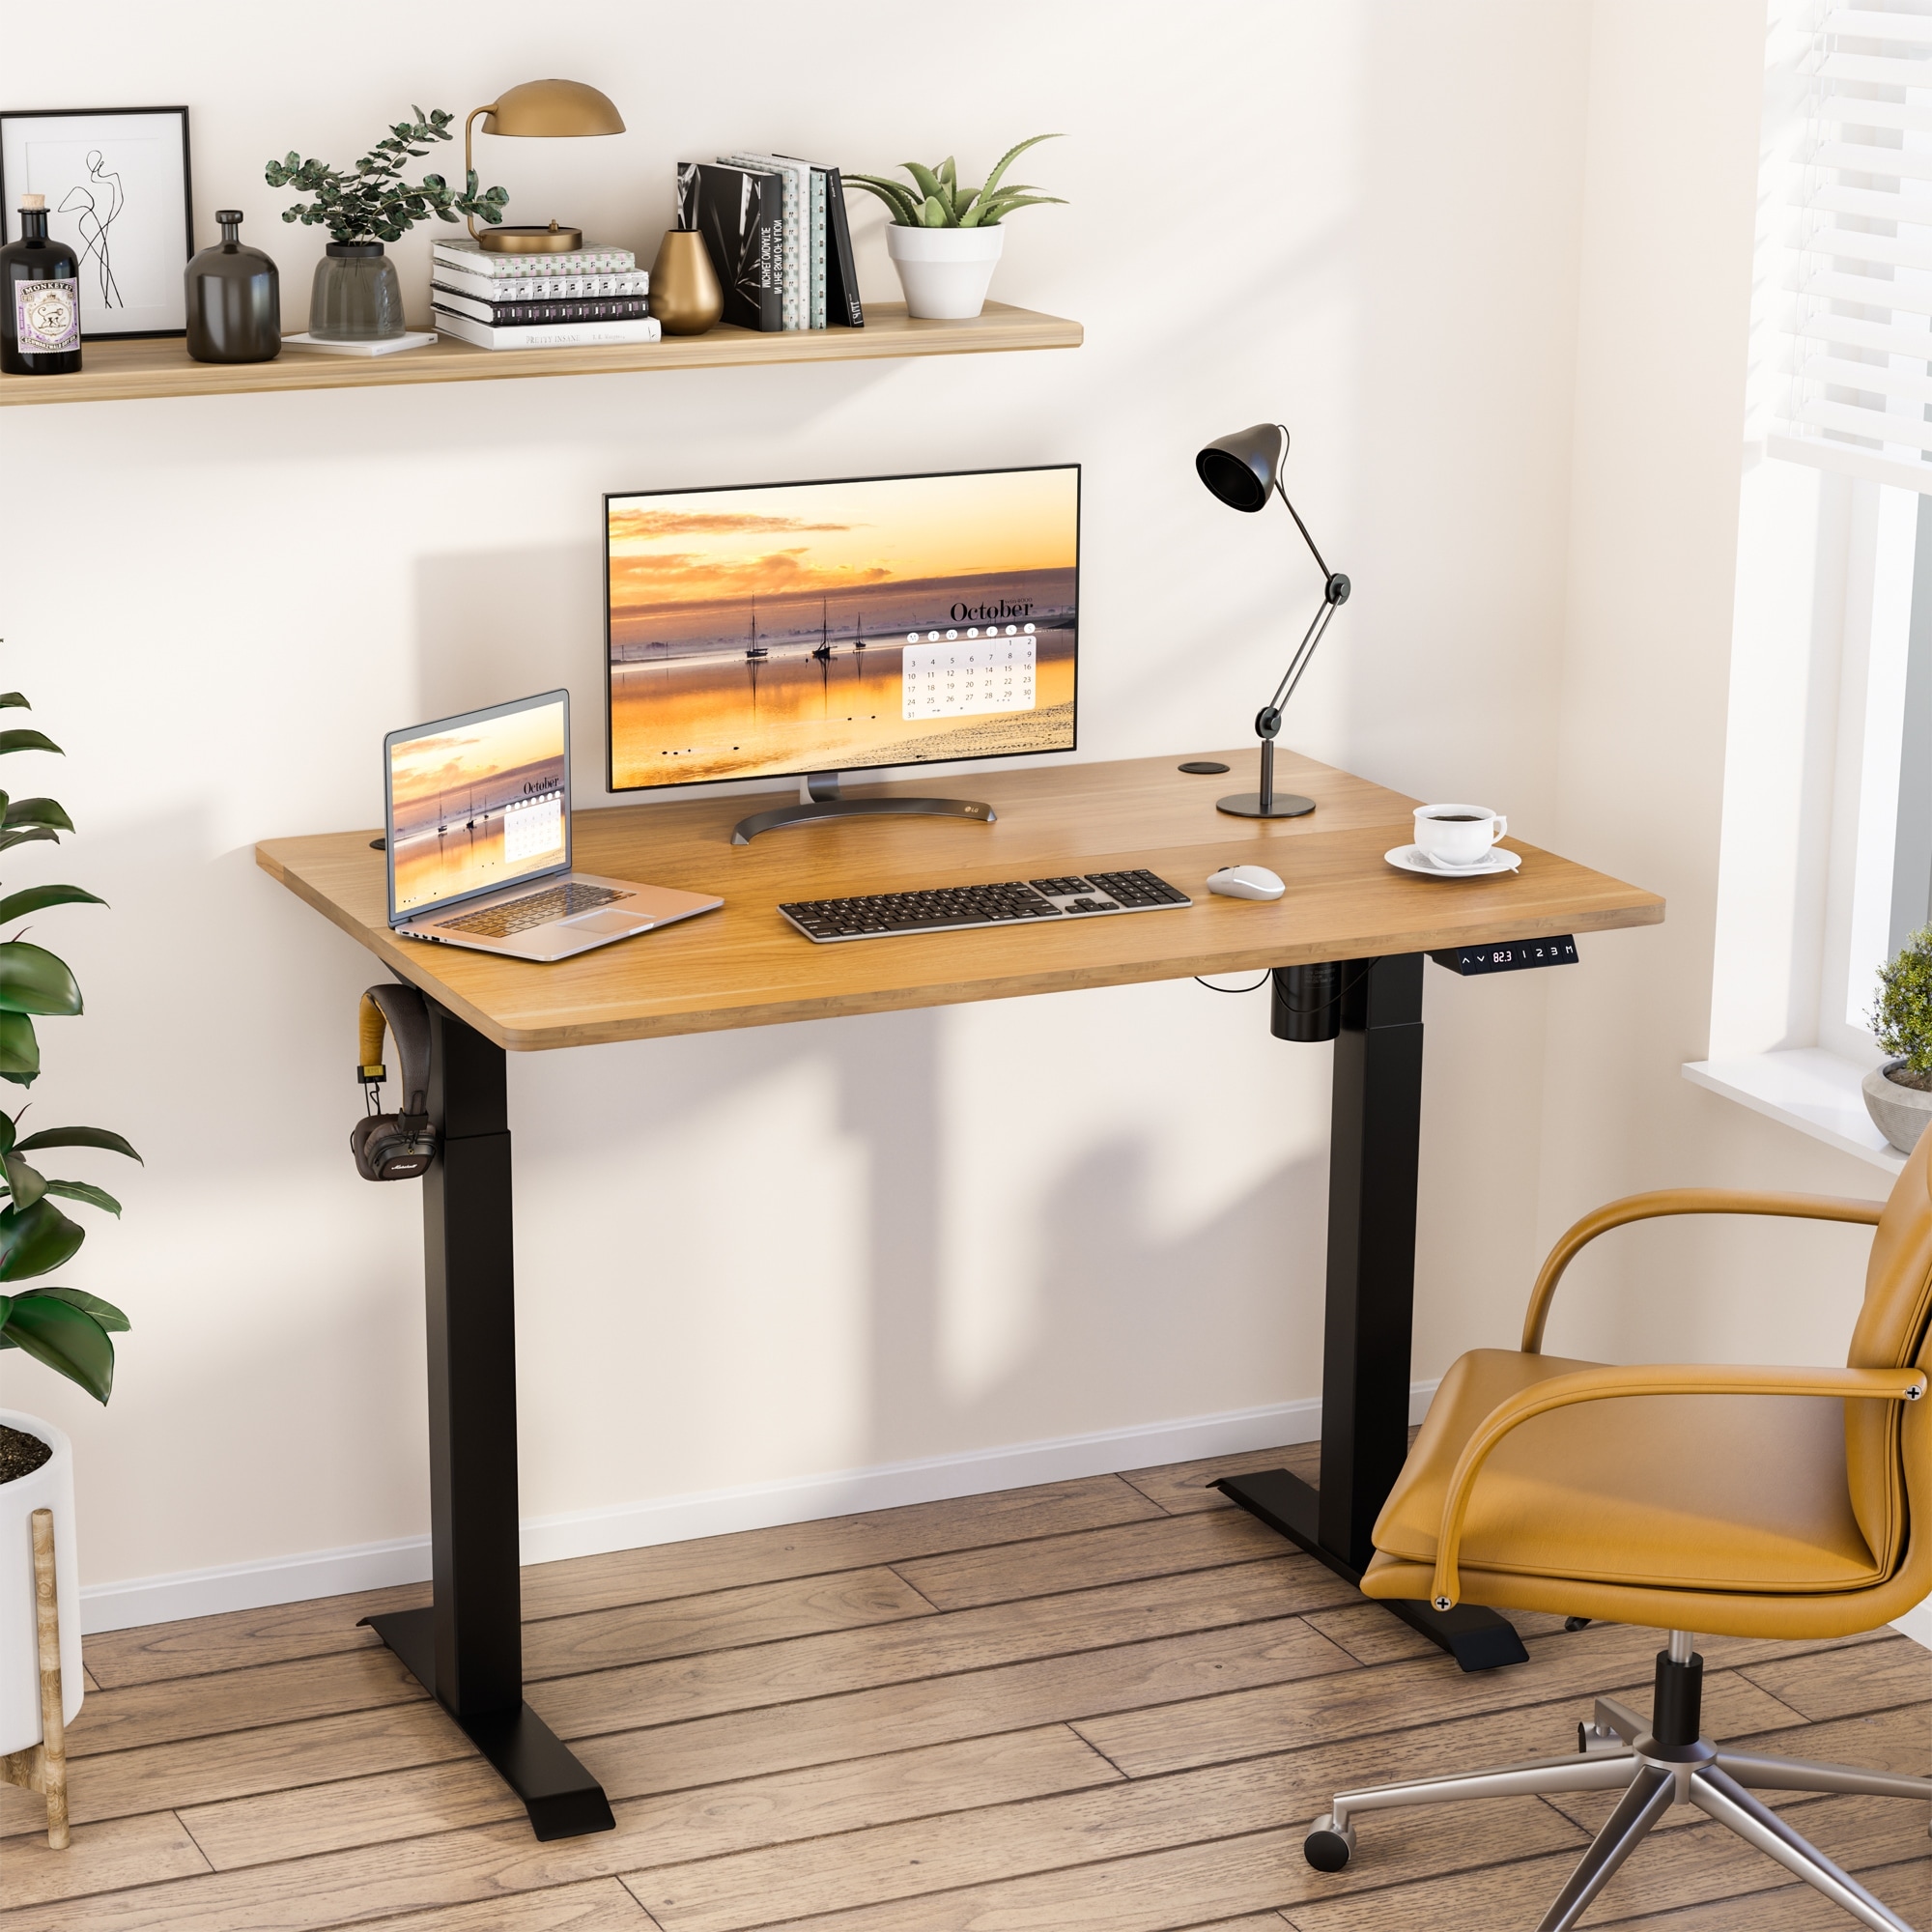 https://ak1.ostkcdn.com/images/products/is/images/direct/5dd8894dd1341e2e04e2c3da35bf590e6be62c8d/Futzca-Height-Adjustable-Electric-Standing-Desk-Sit-Stand-Computer-Stand-up-Desk-with-Splice-Board.jpg